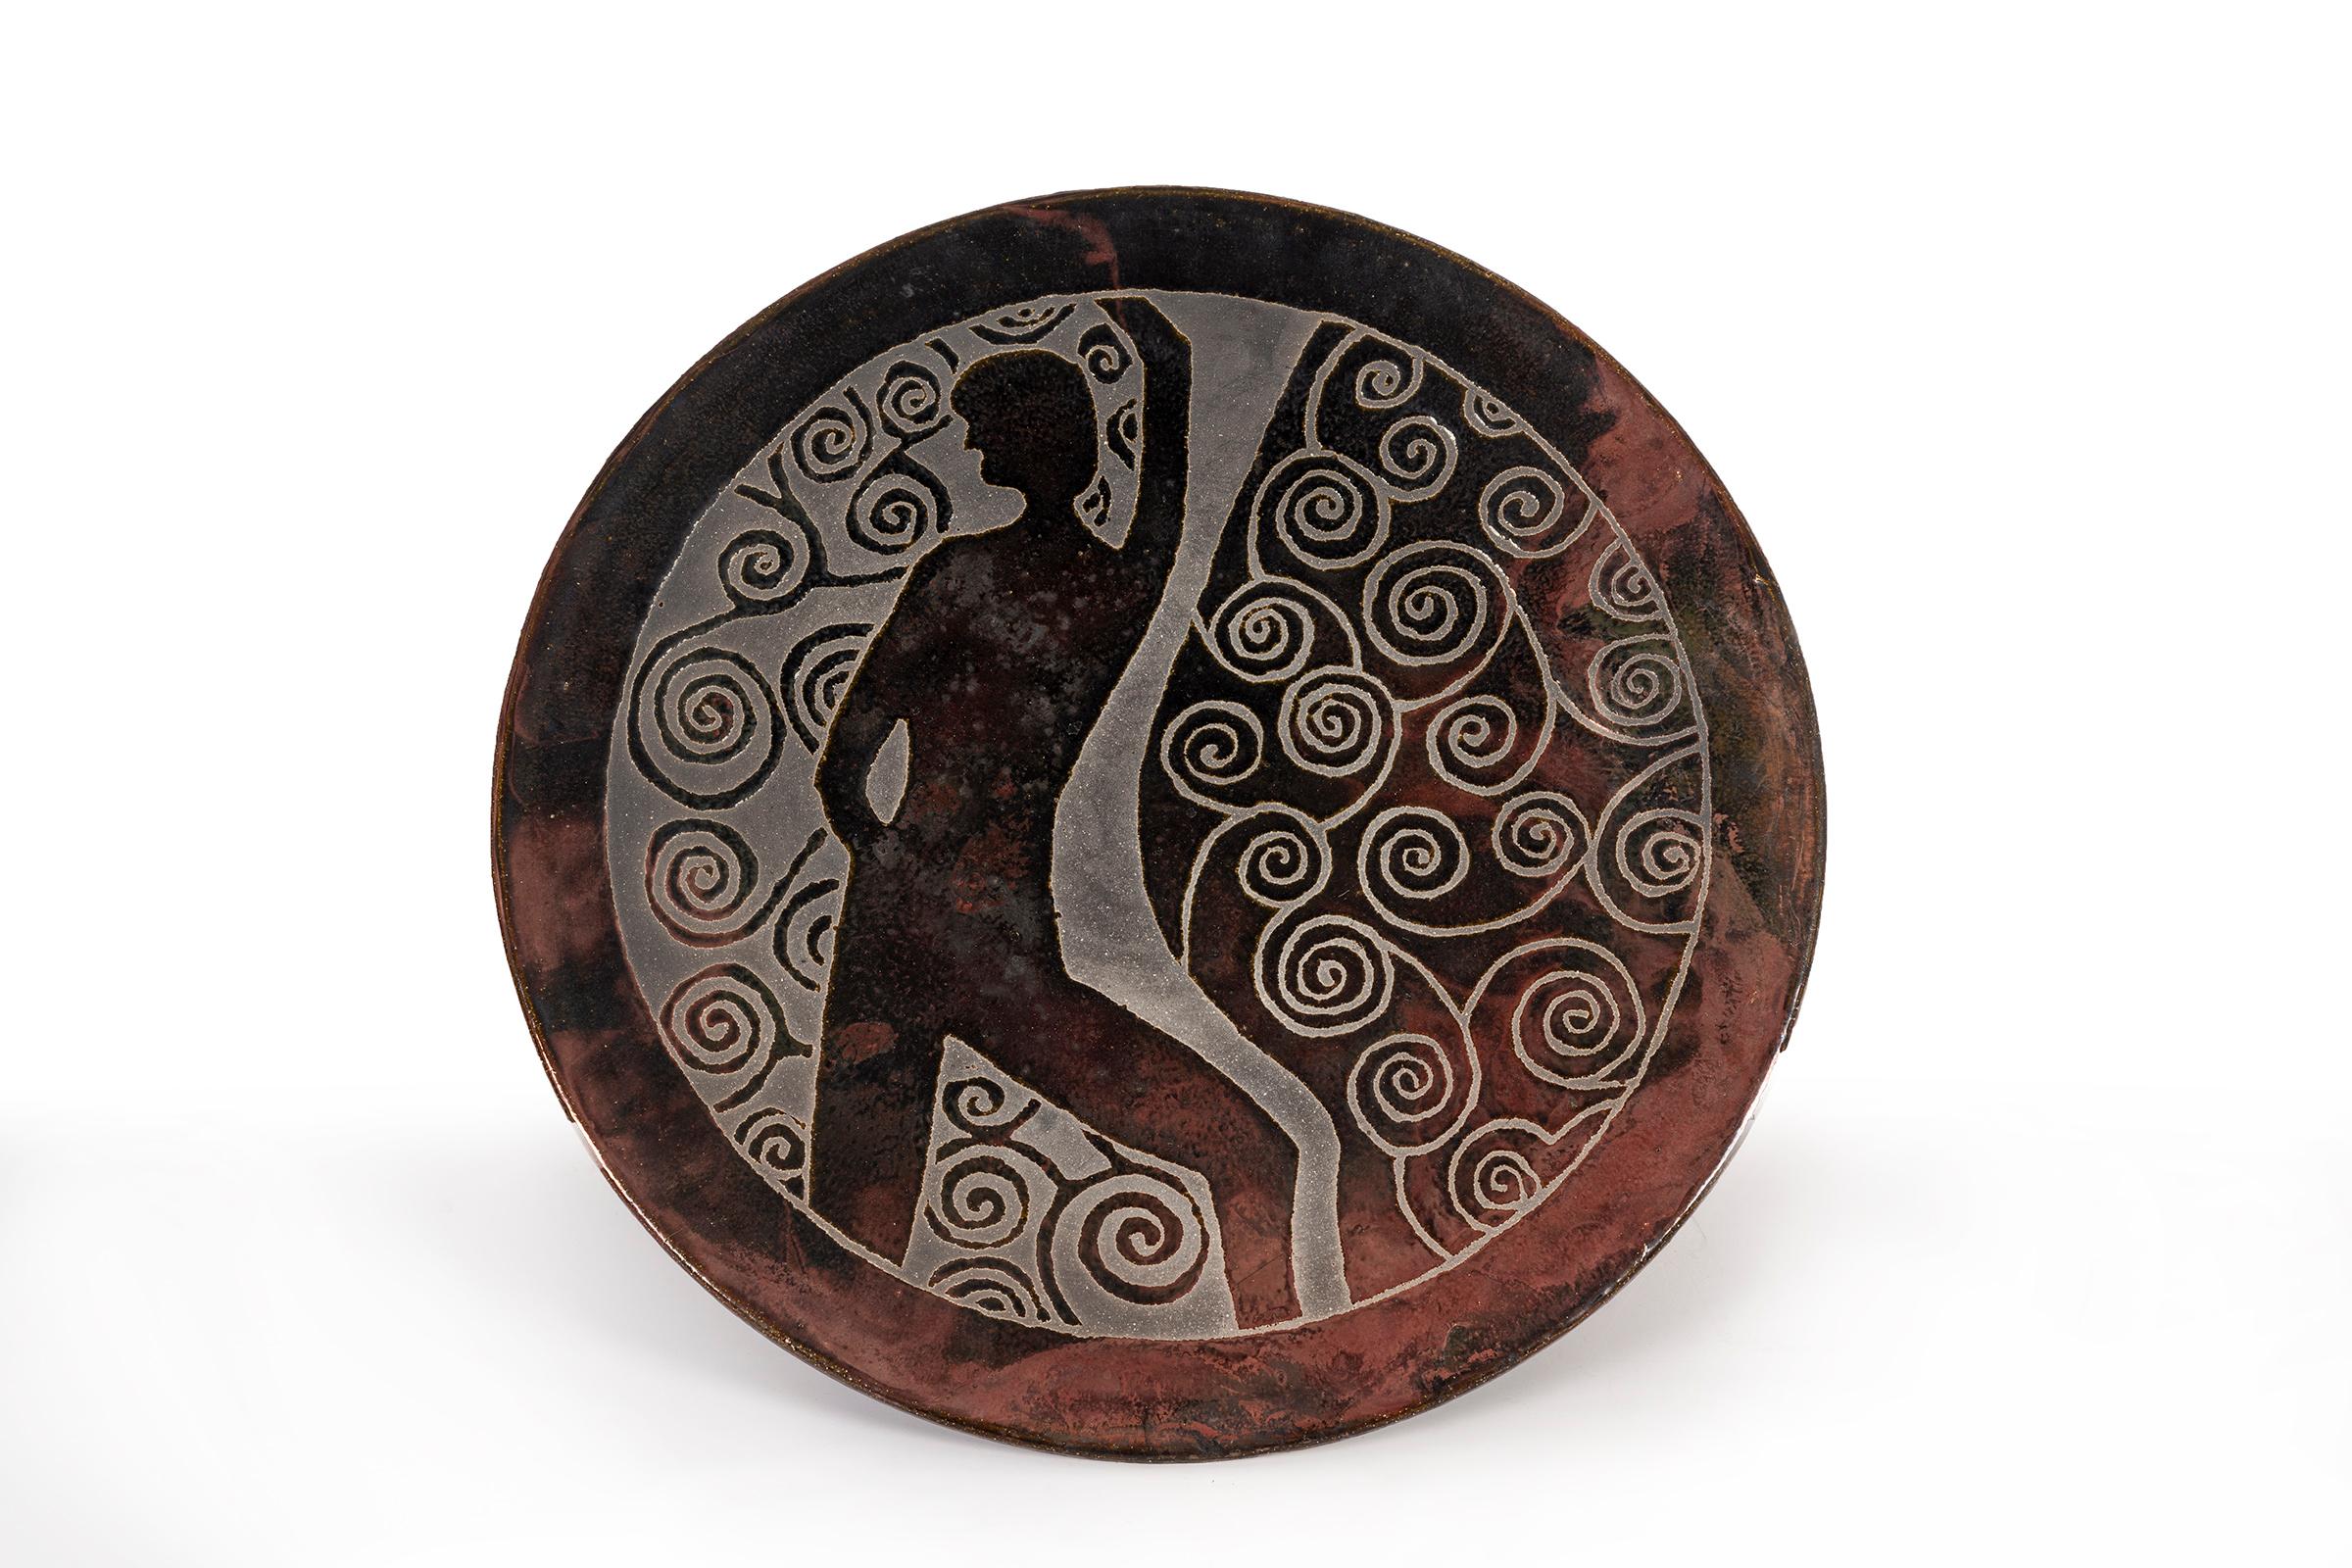 Clyde Burt ceramic charger in glazed stoneware with incised image.
Signature to underside: [CB].
American, circa 1965